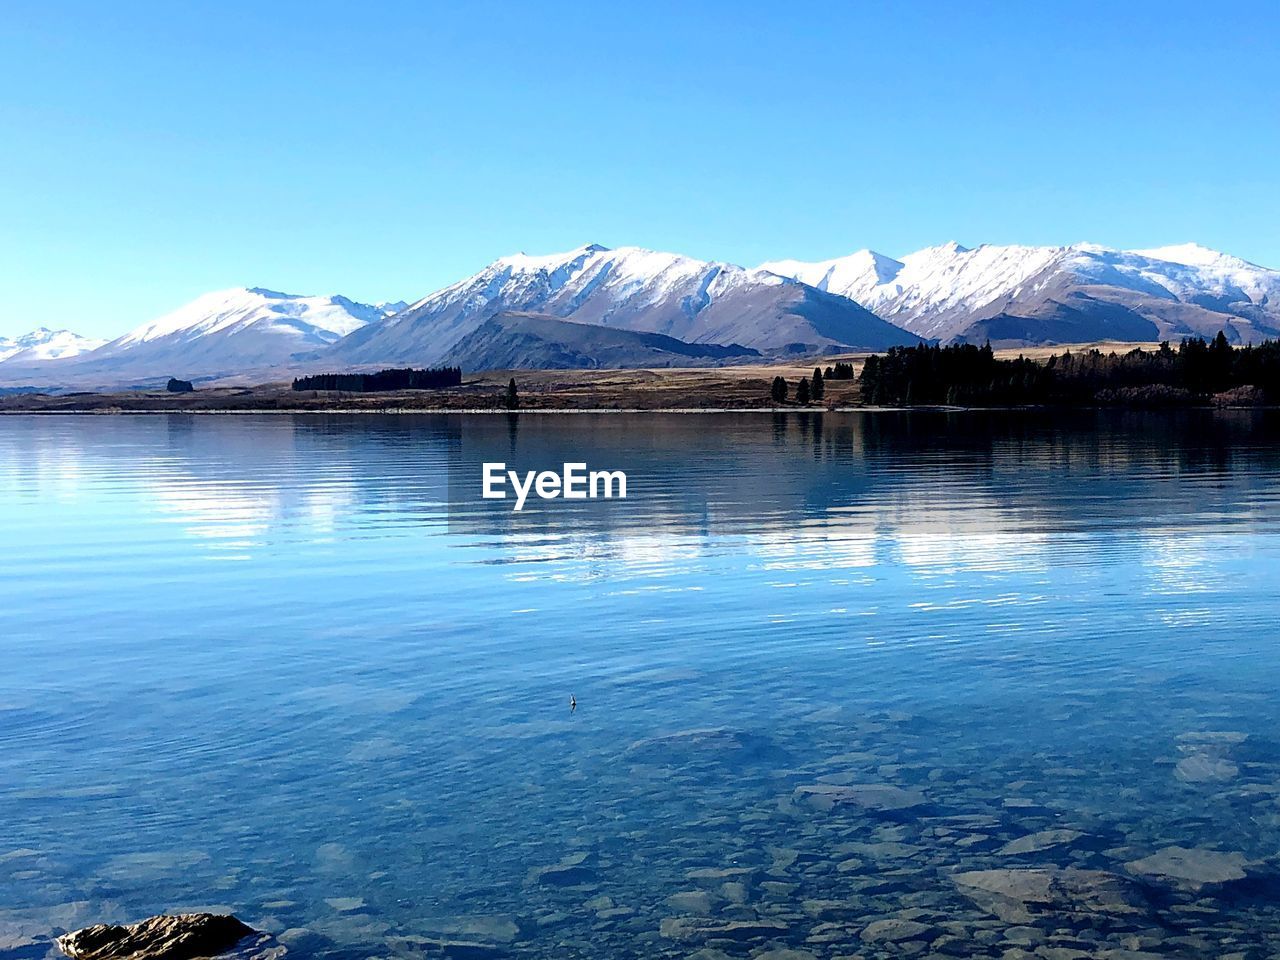 SCENIC VIEW OF LAKE BY SNOWCAPPED MOUNTAINS AGAINST SKY